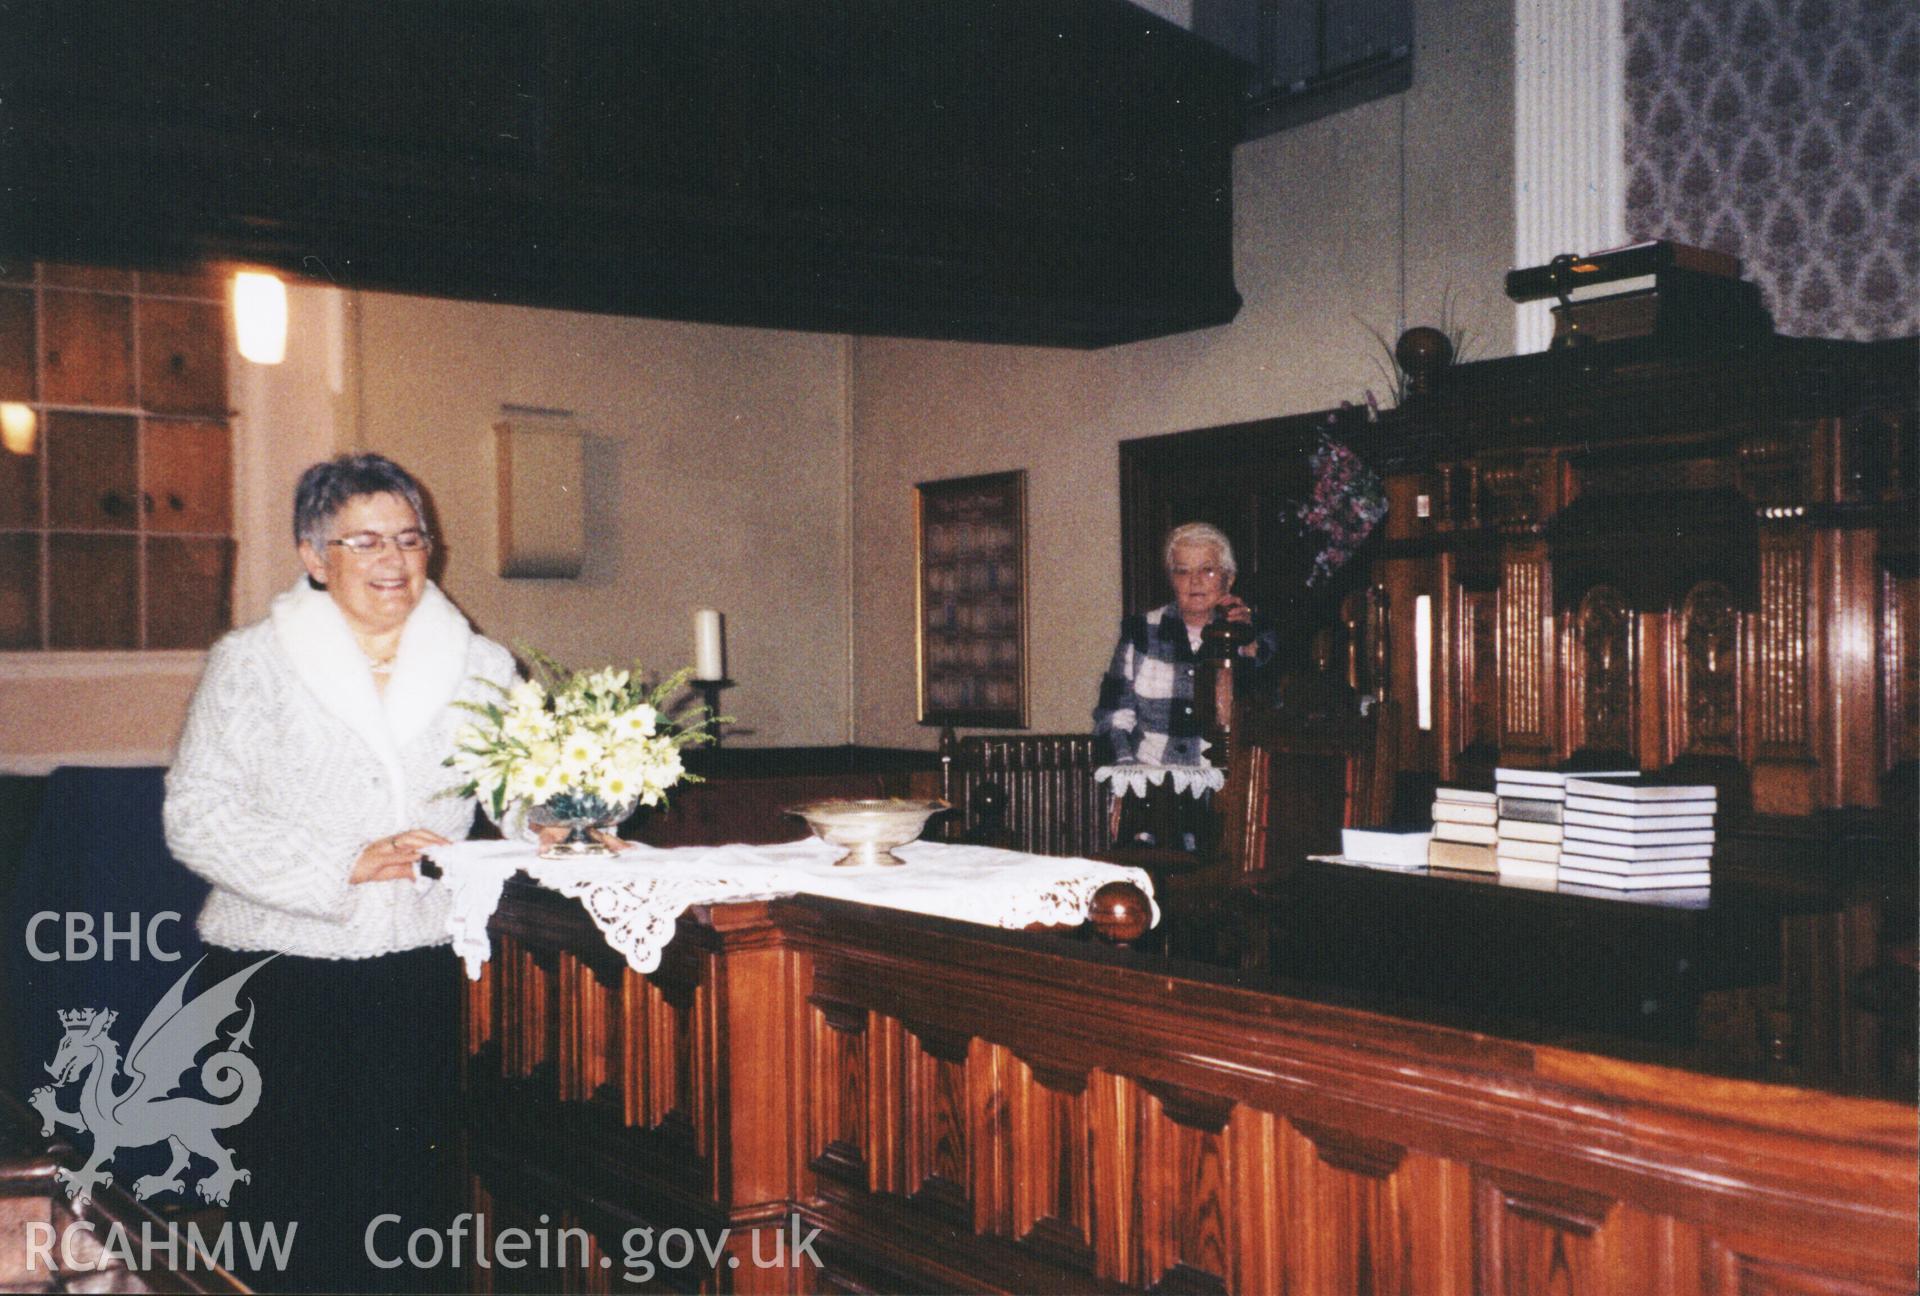 Colour photograph of Rowena and Eluned who played the organ at Peniel chapel, December 2006. Donated as part of the Digital Dissent Project.